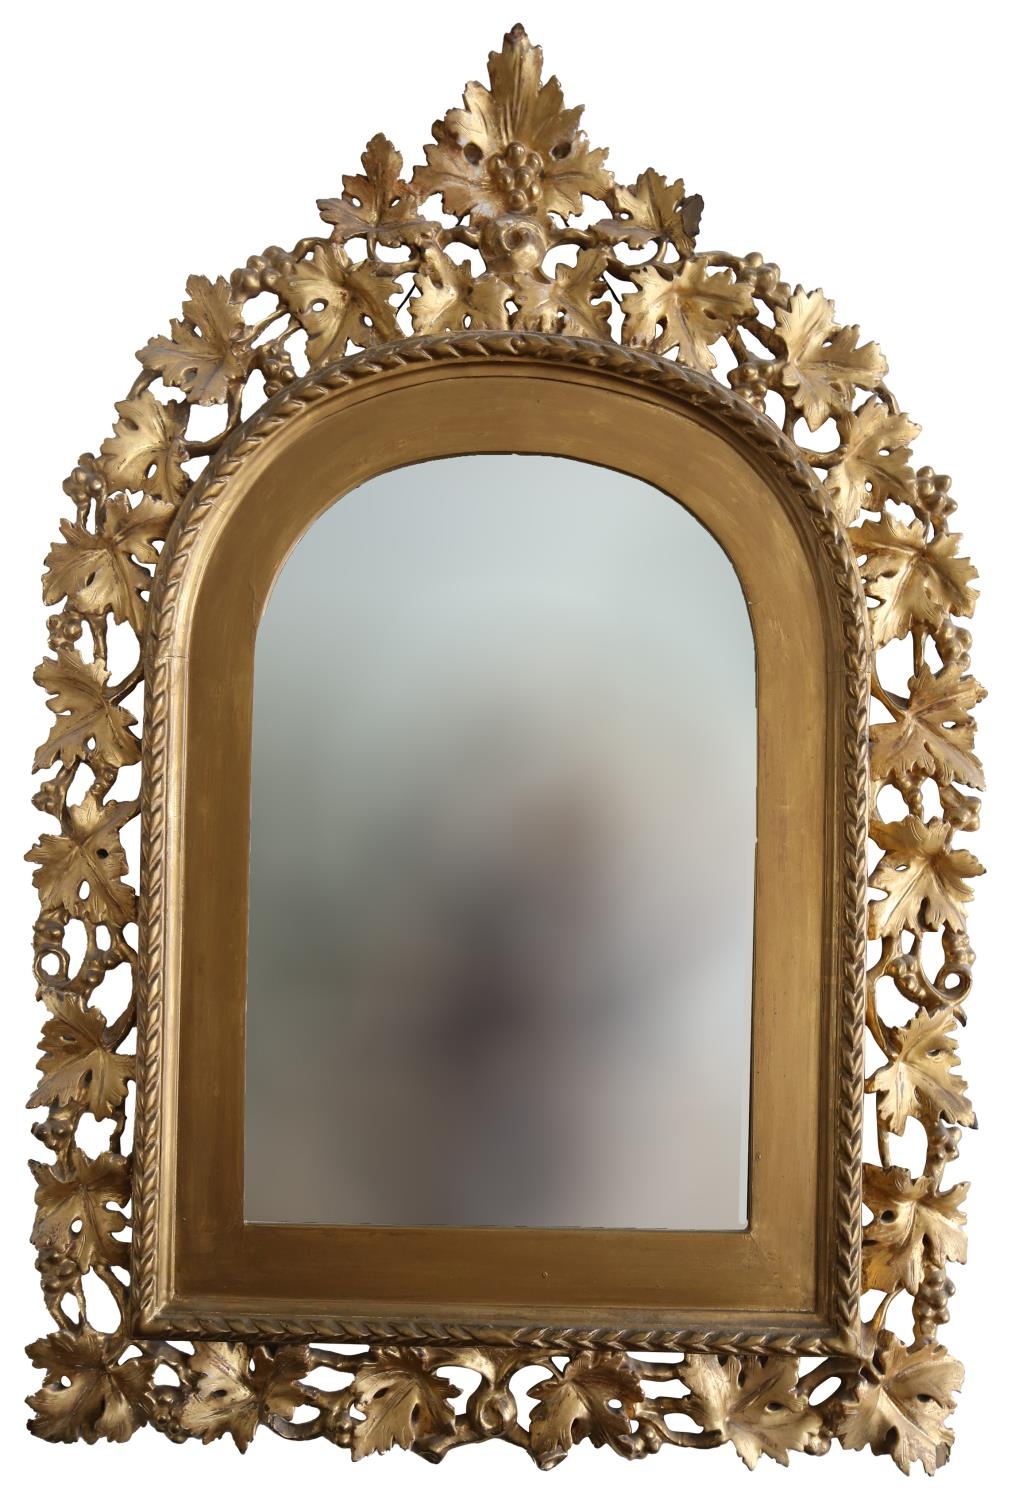 A VICTORIAN GILTWOOD OVAL WALL MIRROR SURROUNDED BY CARVED OAK LEAVES, LATE 19TH CENTURY 65x90cm **